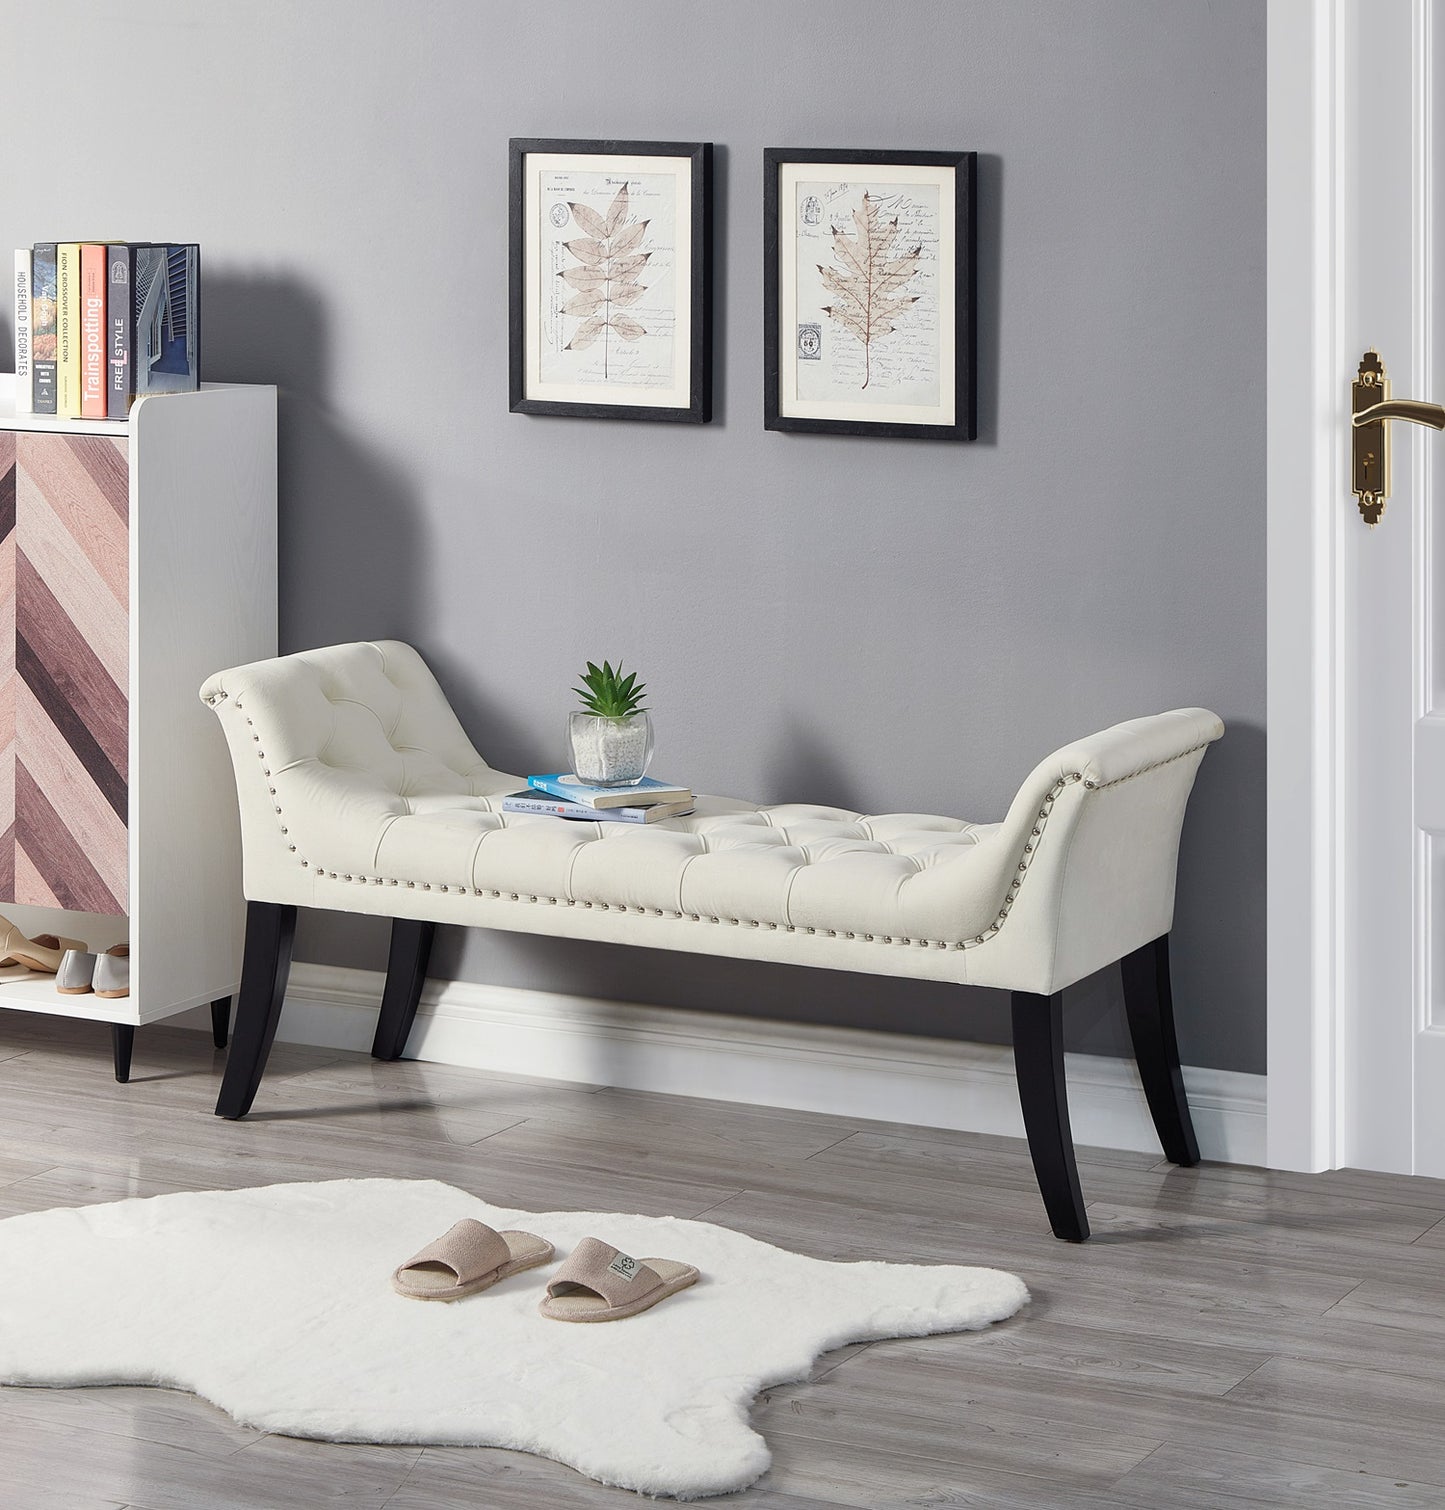 1st Choice Elegant Beige Bedroom Bench - Add a Touch of Comfort and Style